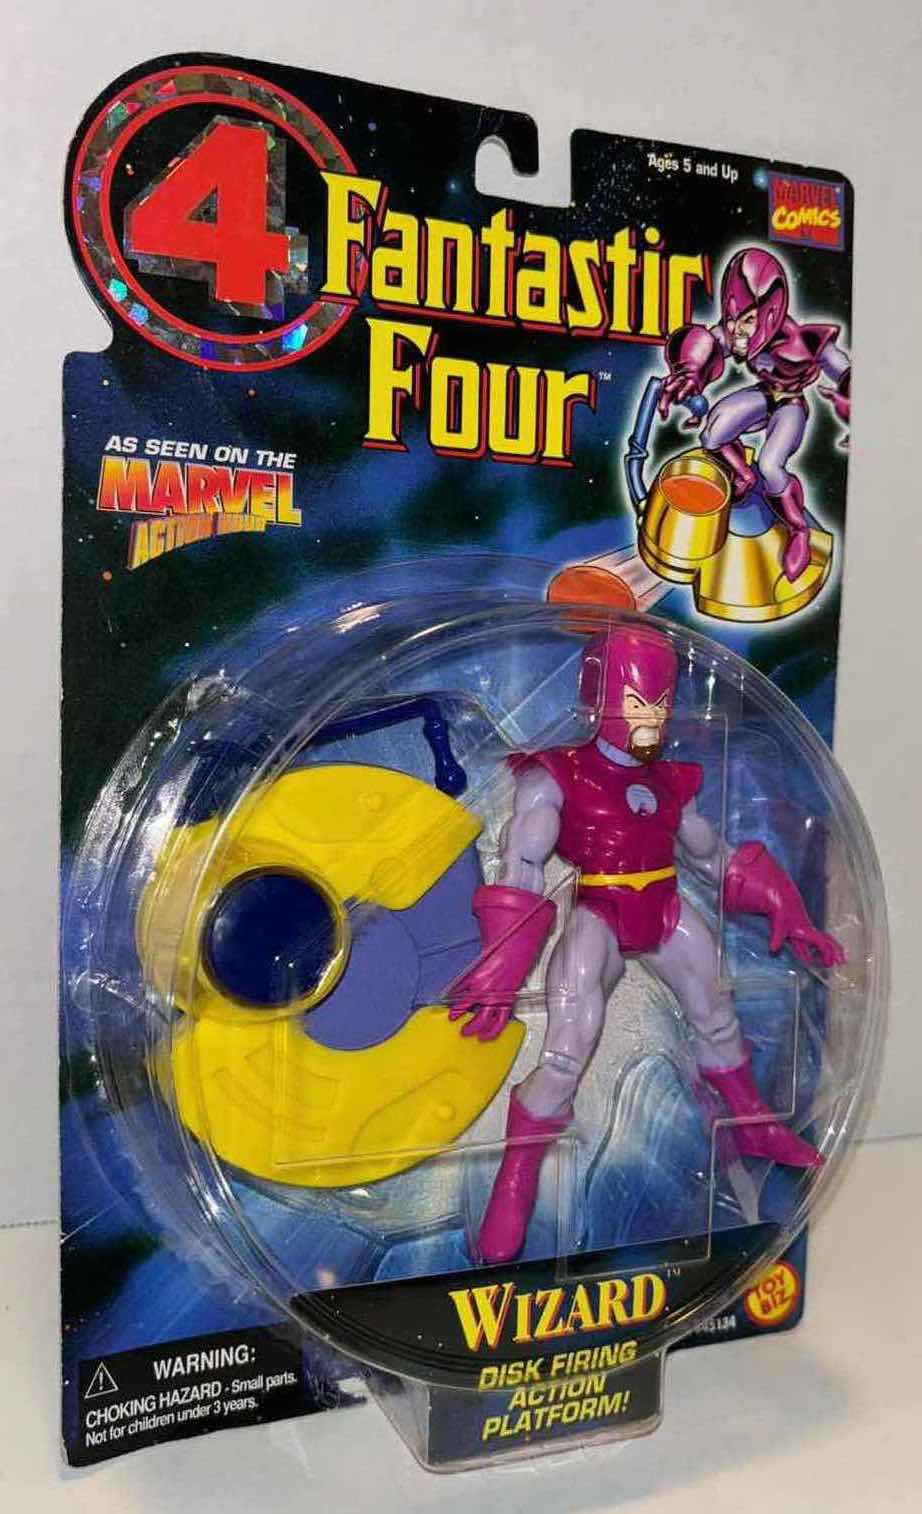 Photo 1 of NEW 1996 TOY BIZ MARVEL COMICS FANTASTIC FOUR ACTION FIGURE & ACCESSORIES, “WIZARD” W DISK FIRING ACTION PLATFORM